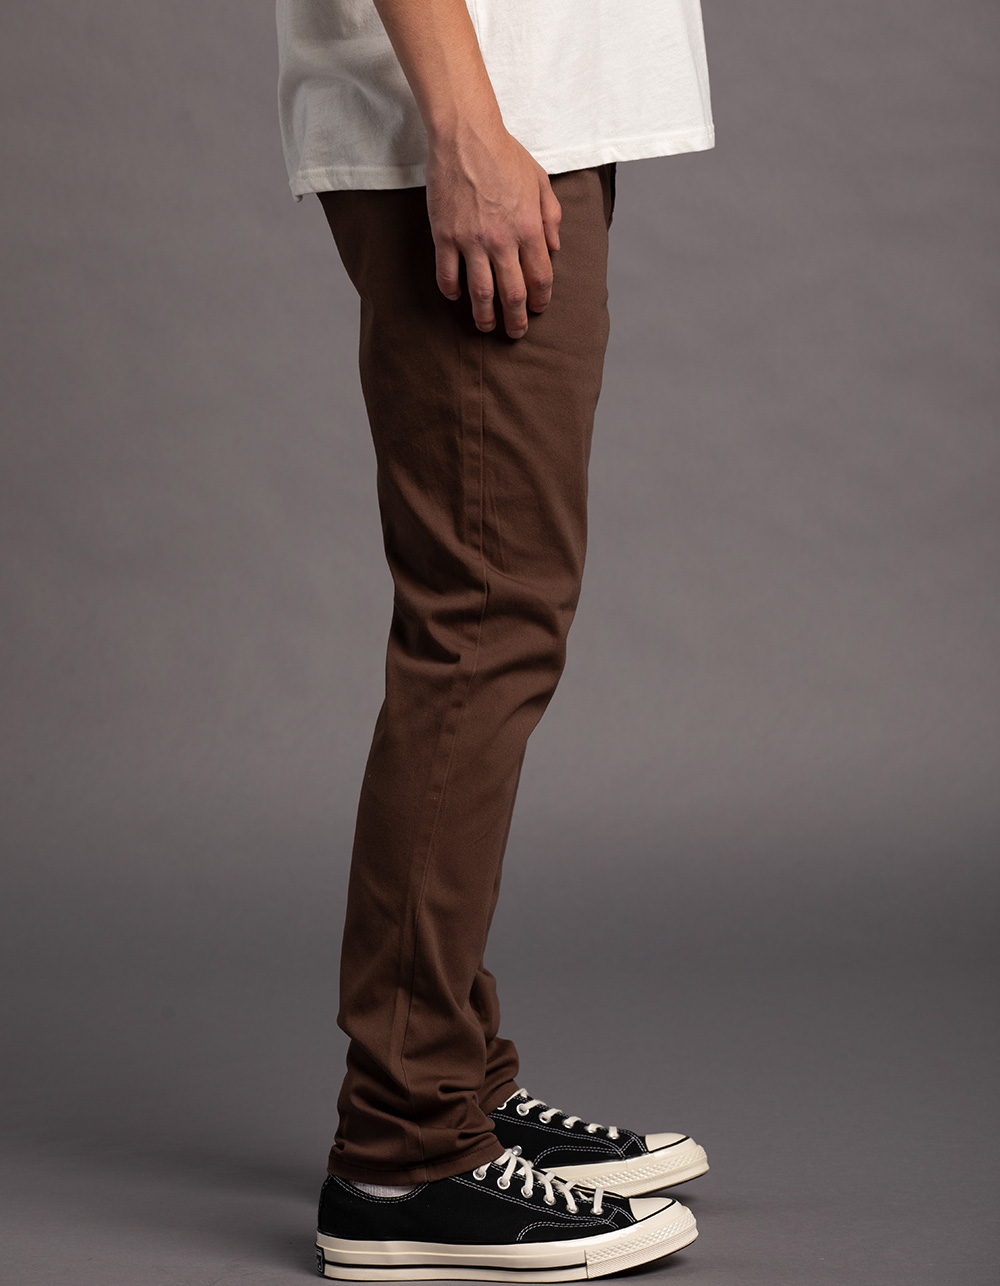 Seasonal Taped Track Pants - Black / Whisky Brown, Men's Trousers, Chinos, Joggers & Casual Trousers